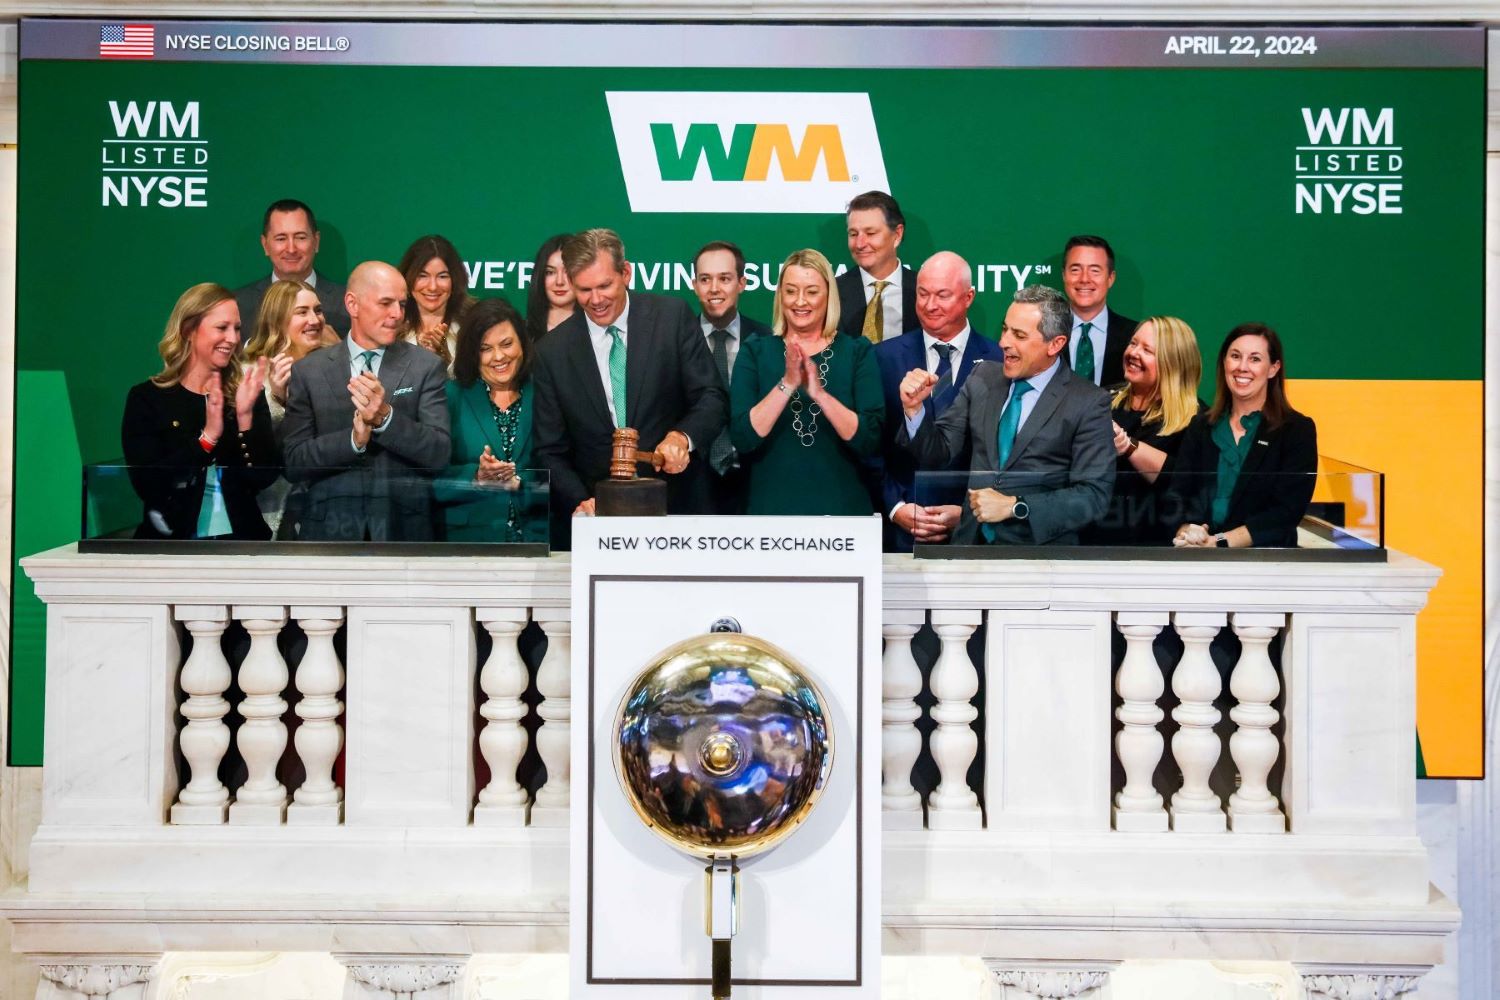 WM listed NYSE